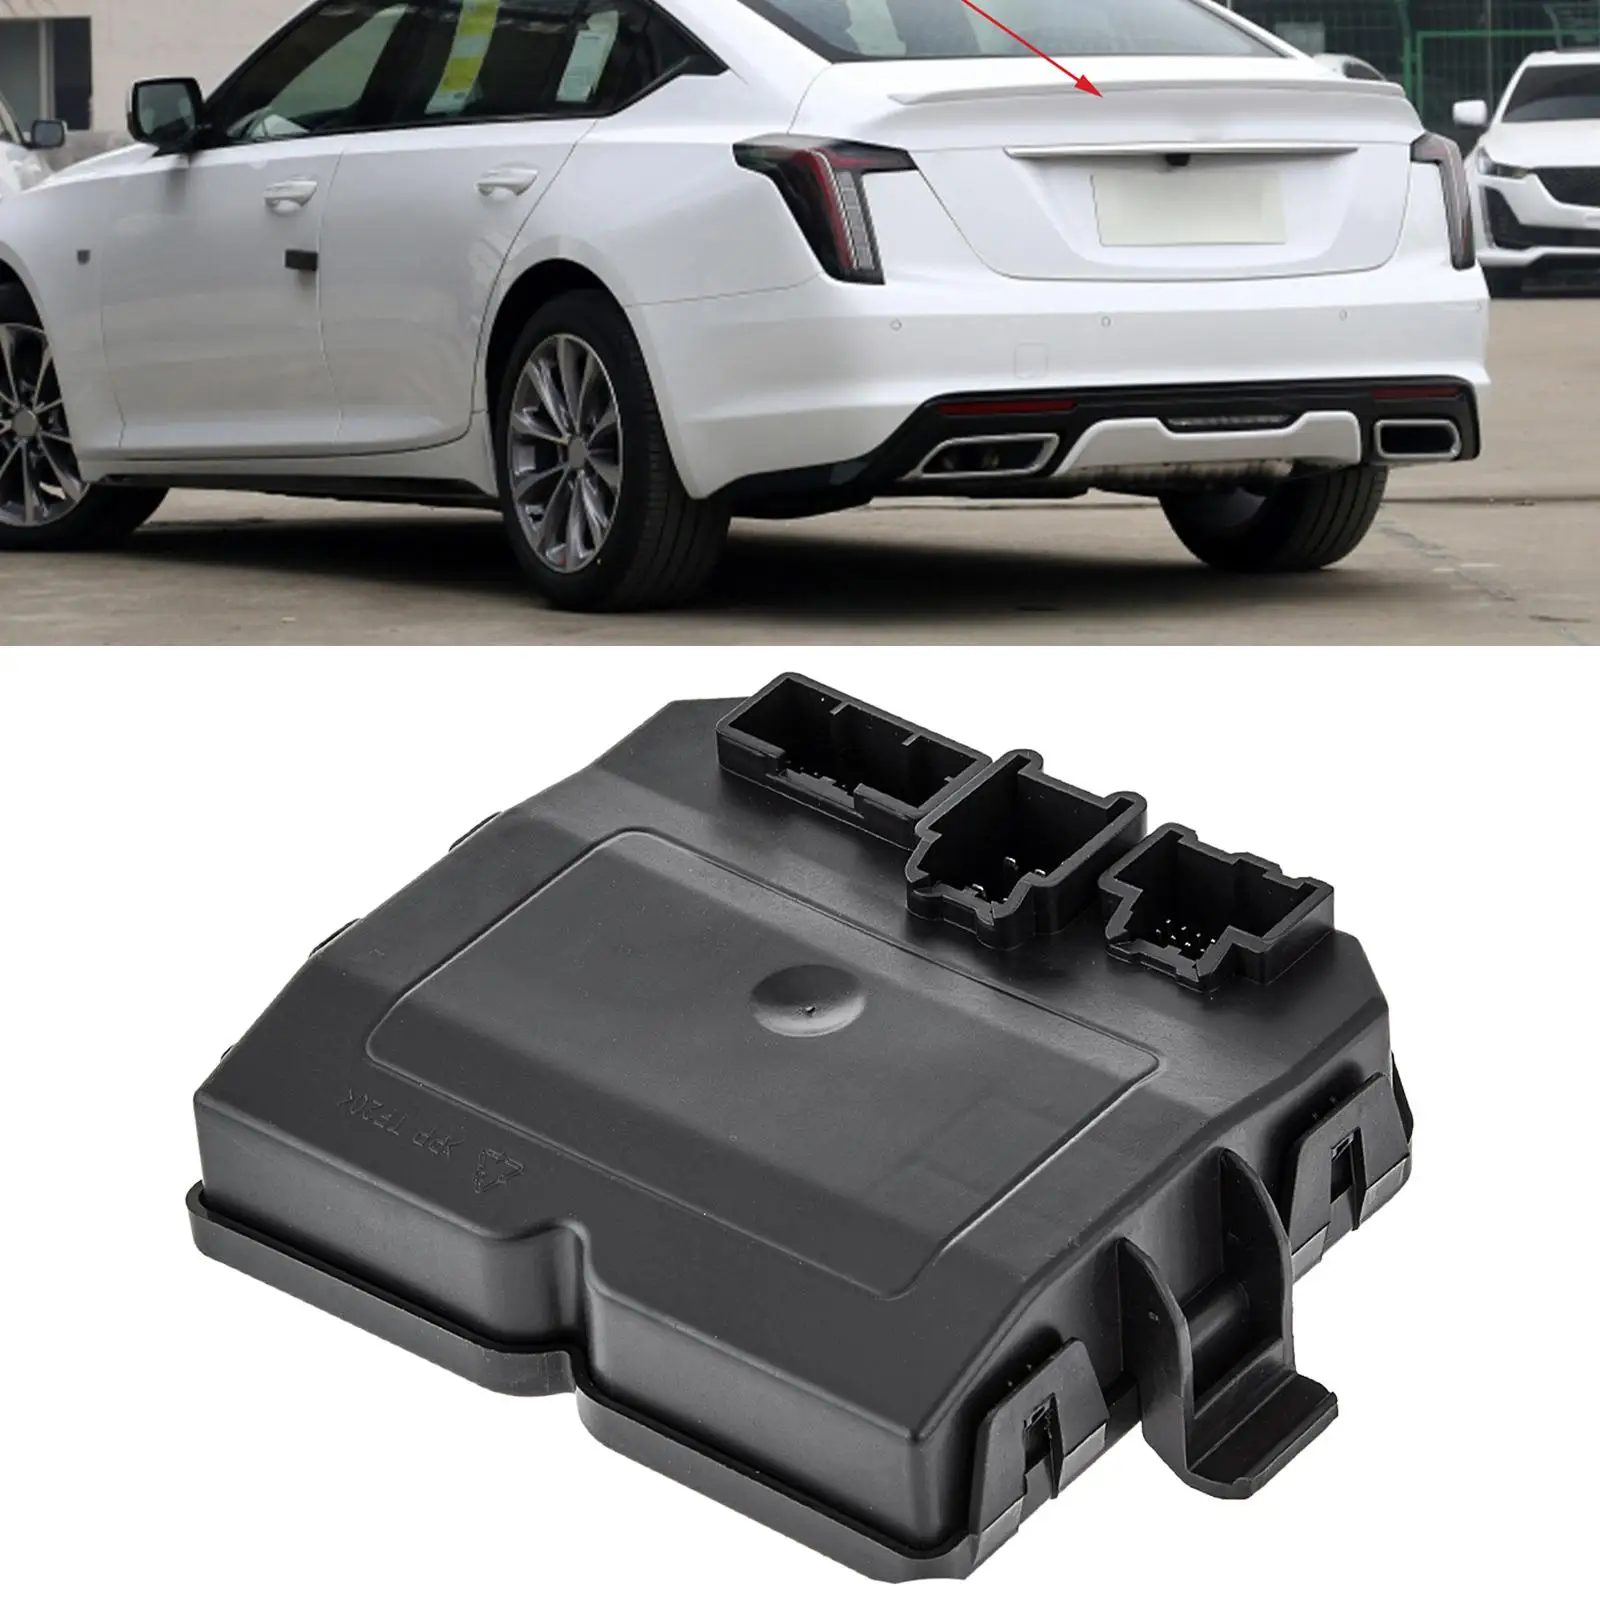 502-032 Accessories Direct Replaces 20837962 20837967 for Cadillac Durable